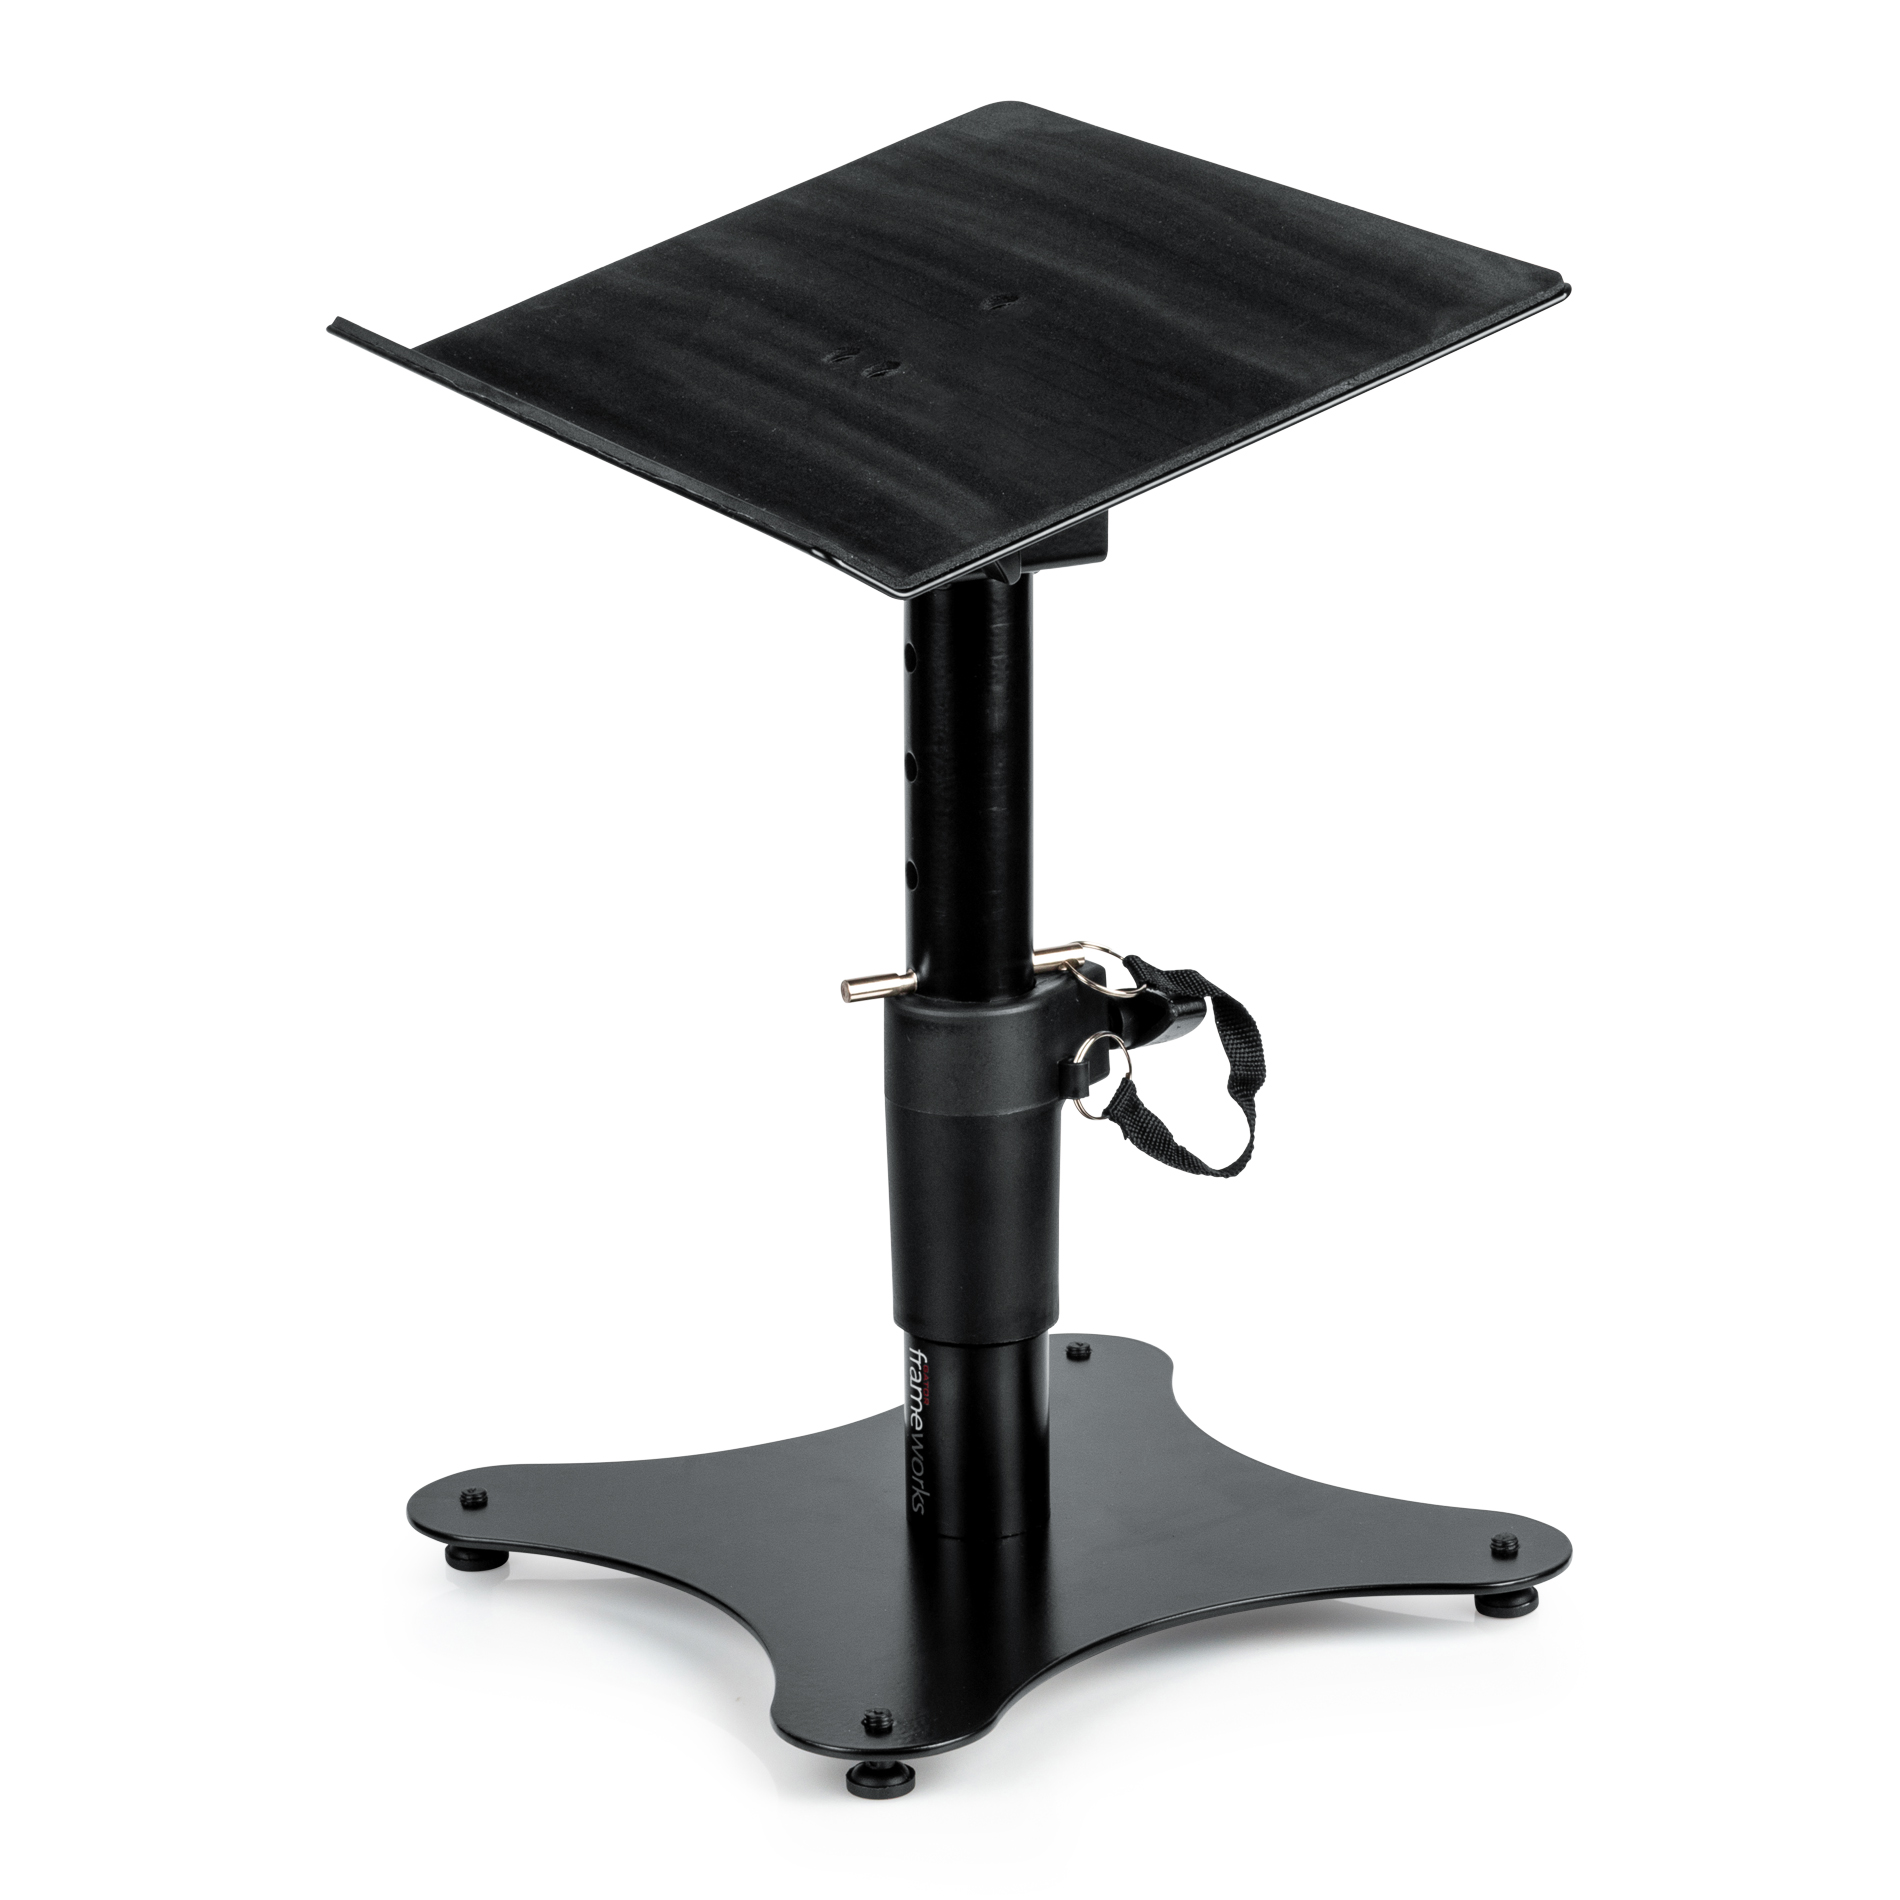 Desktop Laptop And Accessory Stand-GFWLAPTOP2000